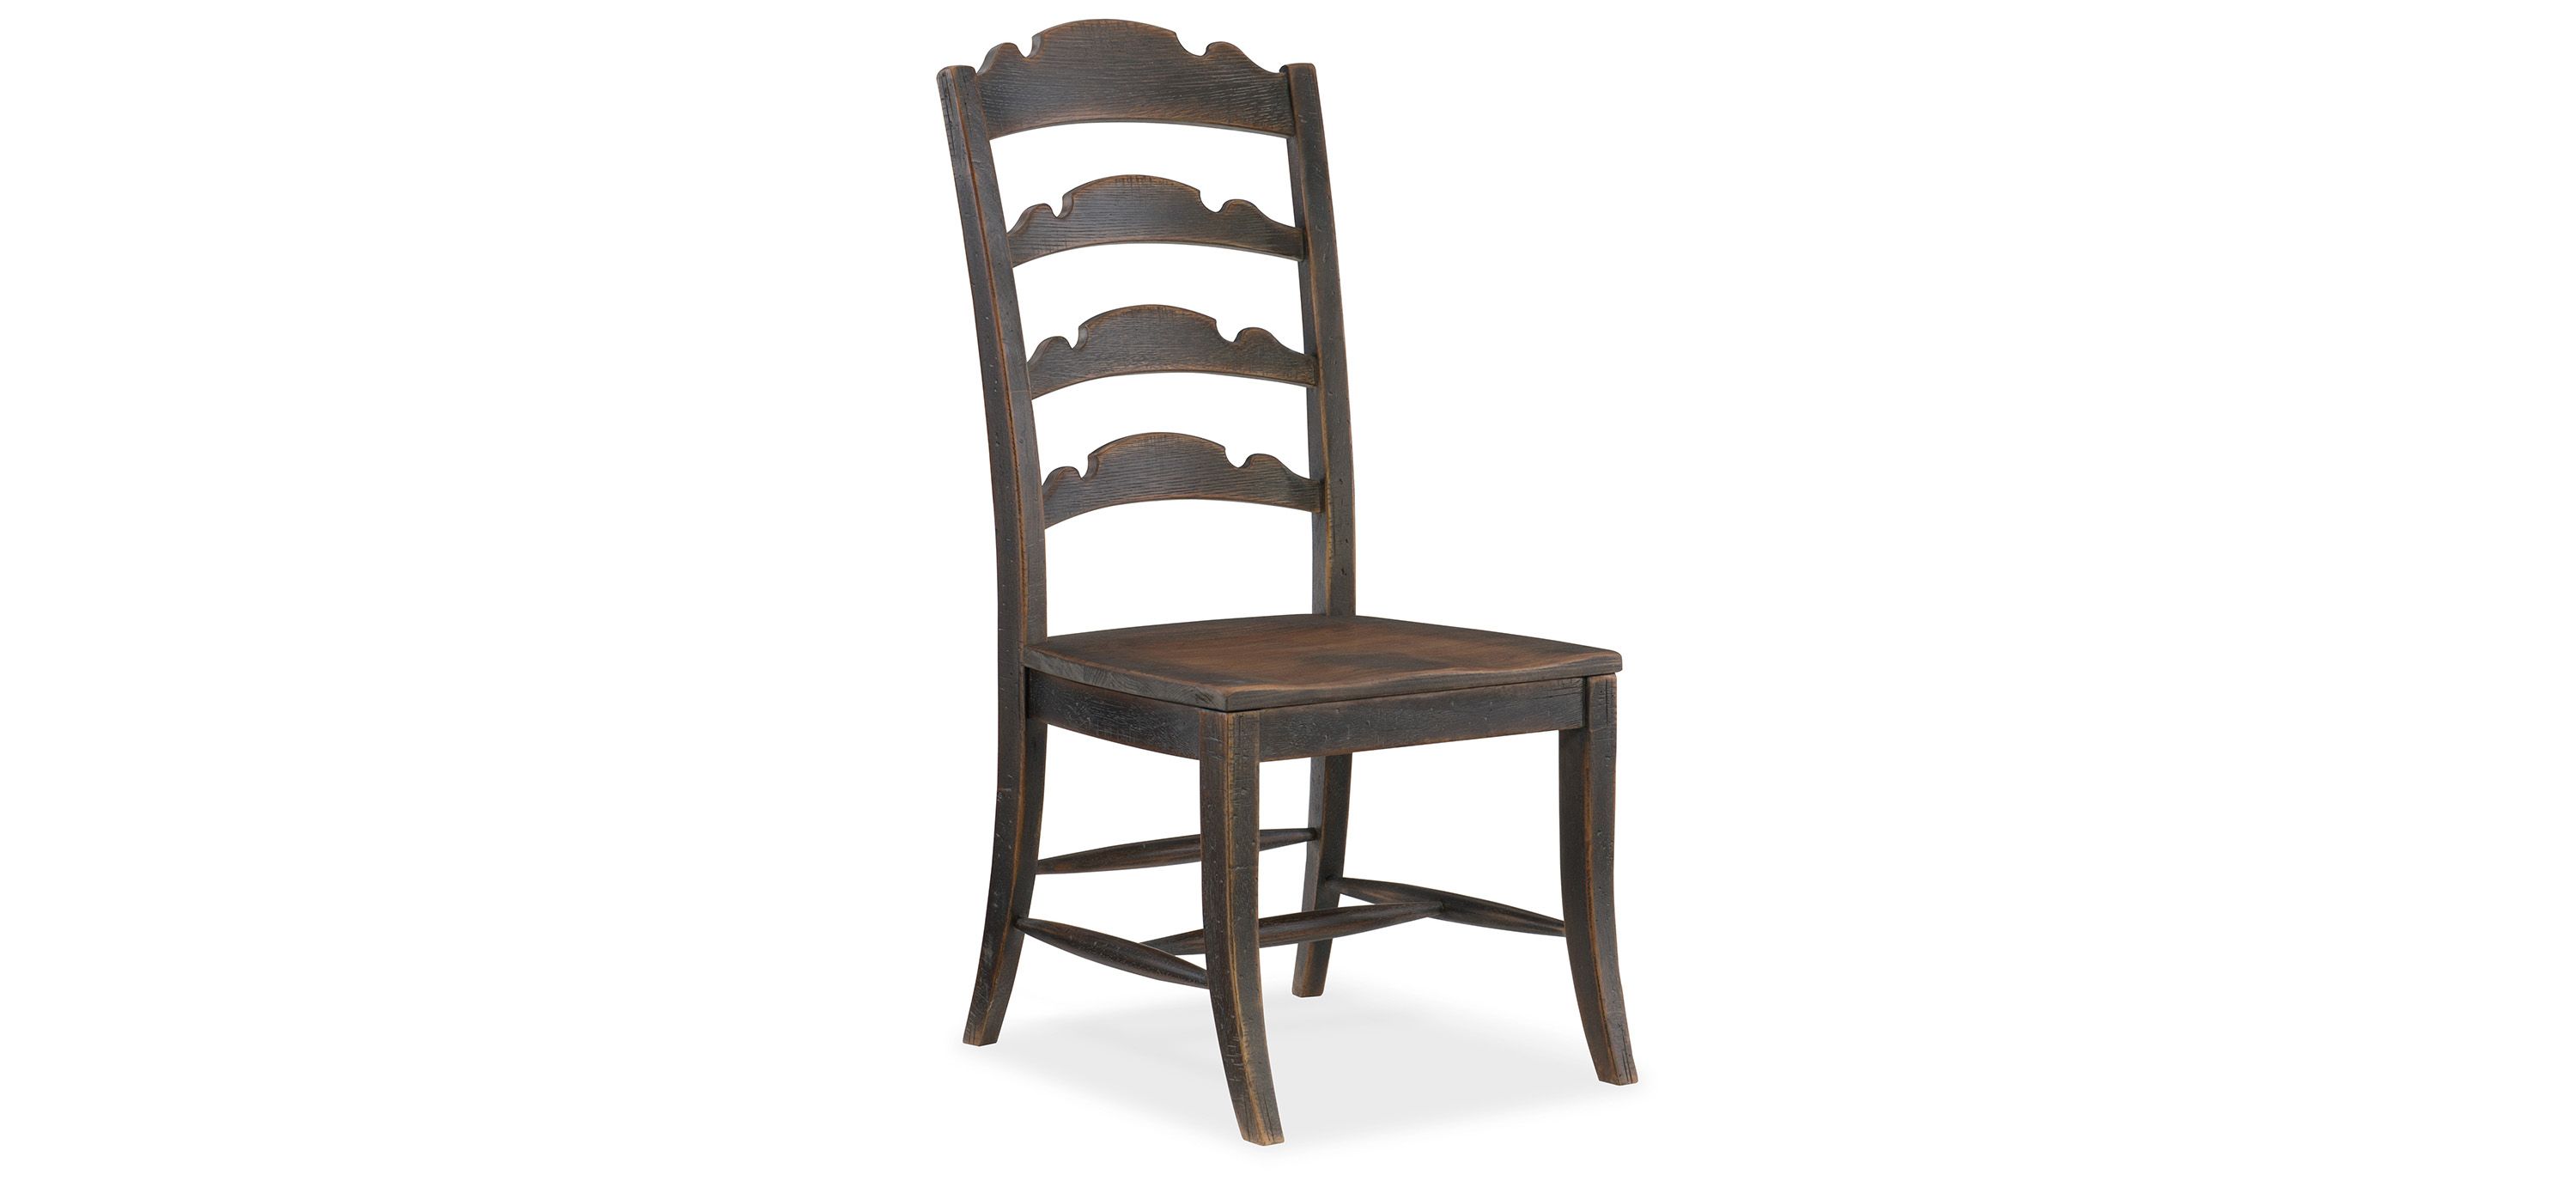 Hill Country Twin Sisters Ladderback Side Chair - Set of 2